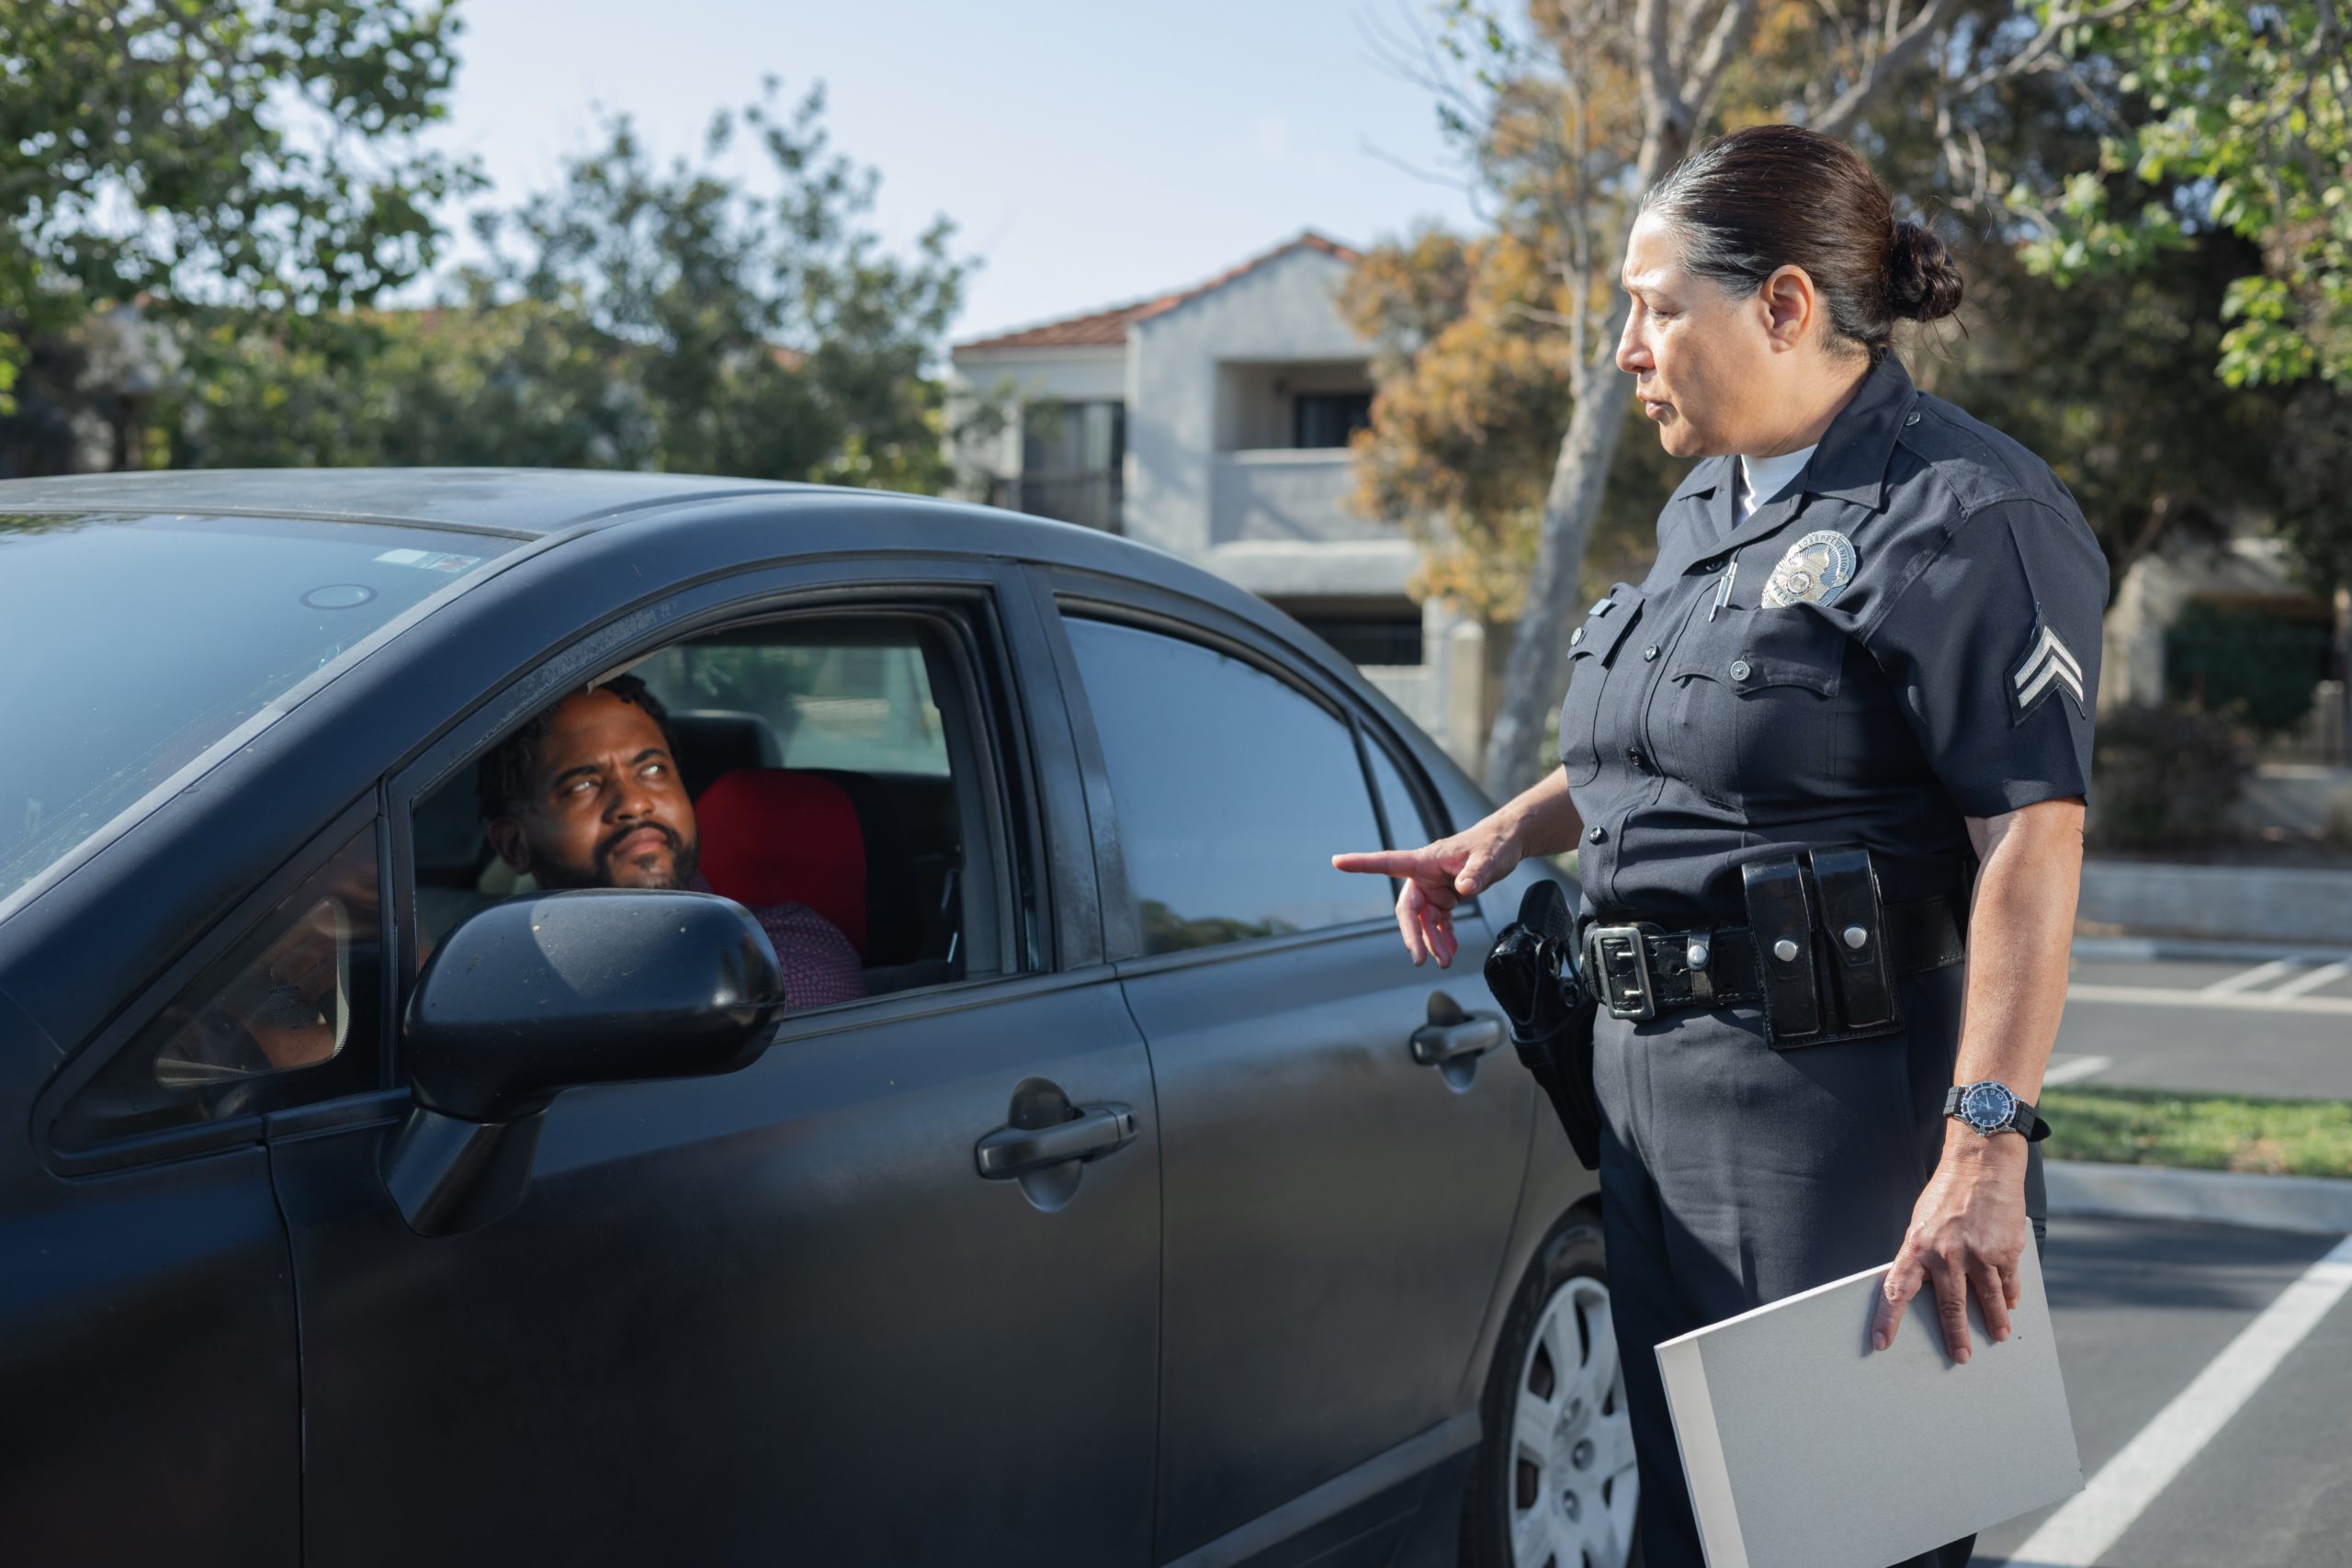 What to Do if You’re Pulled Over with Expired Registration